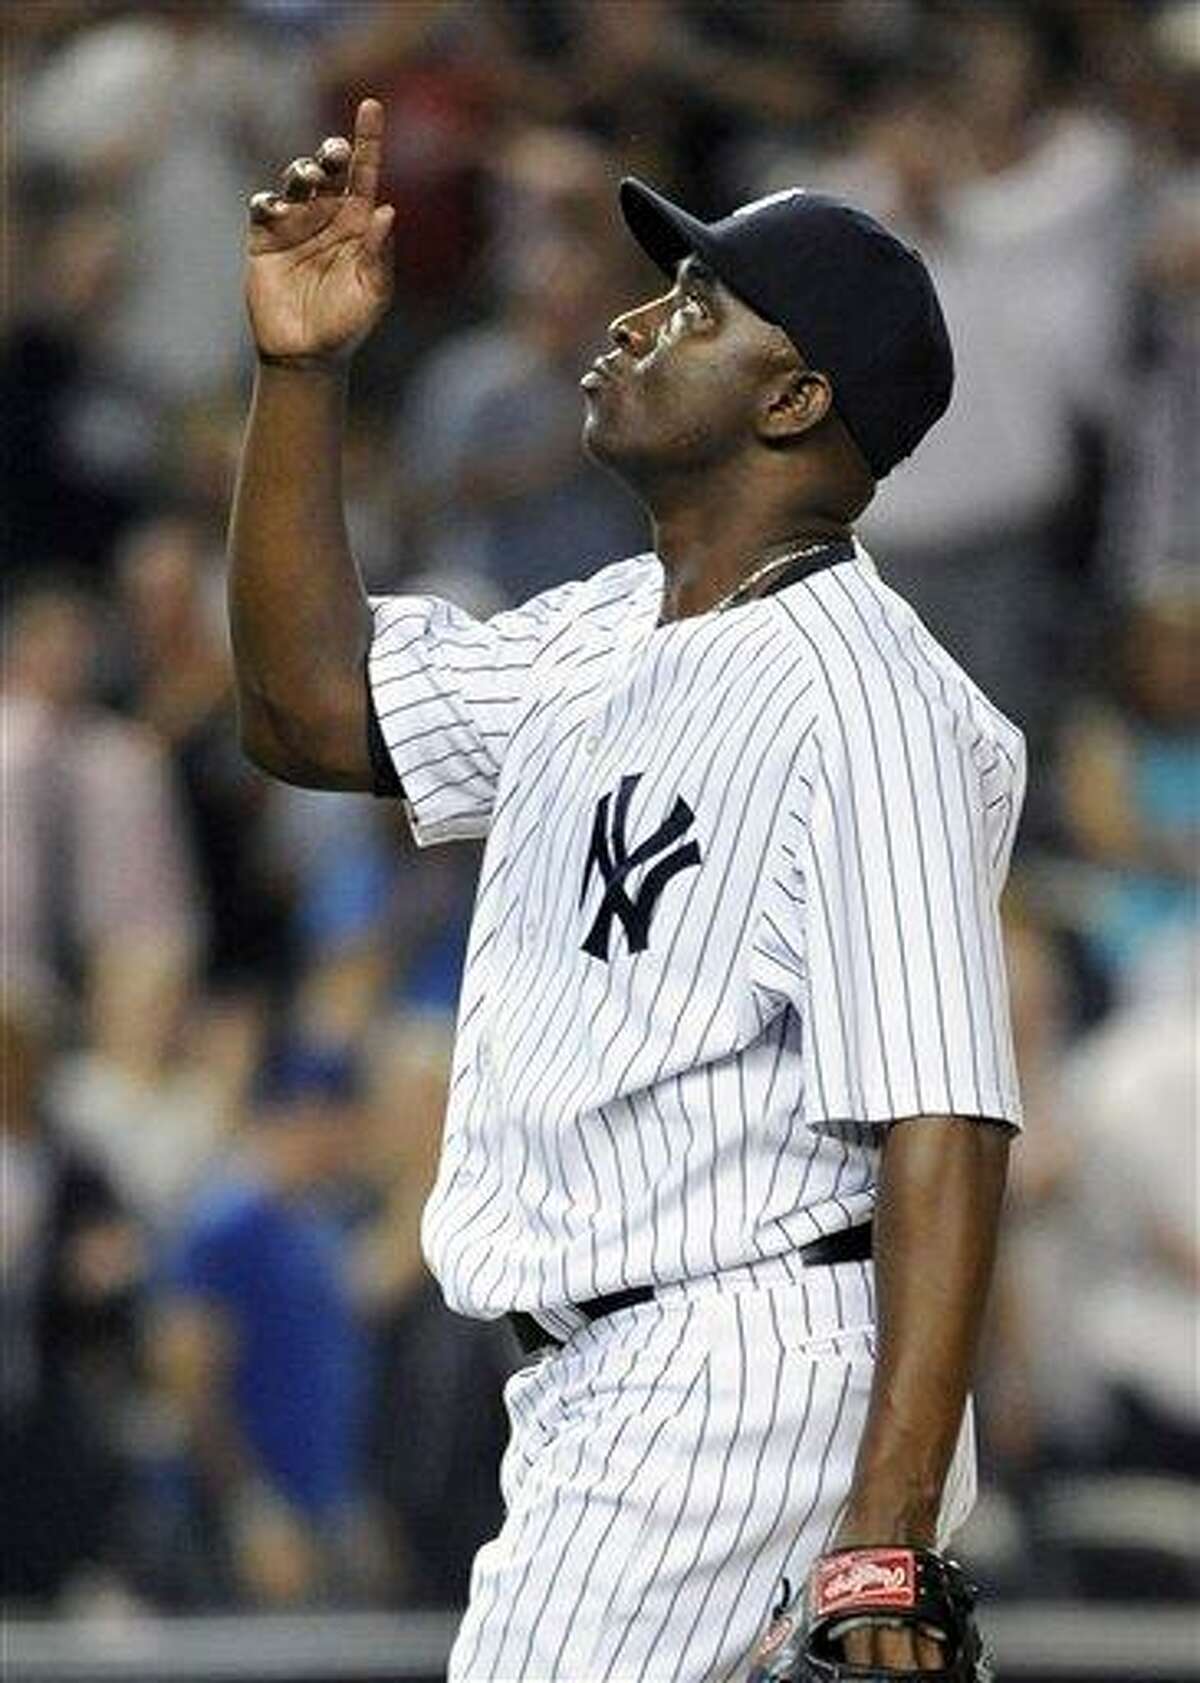 New York Yankees relief pitcher Rafael Soriano points skyward after the Yankees defeated the Toronto Blue Jays 2-1 in a baseball game on Tuesday, Aug., 28, 2012, at Yankee Stadium in New York. (AP Photo/Kathy Kmonicek)